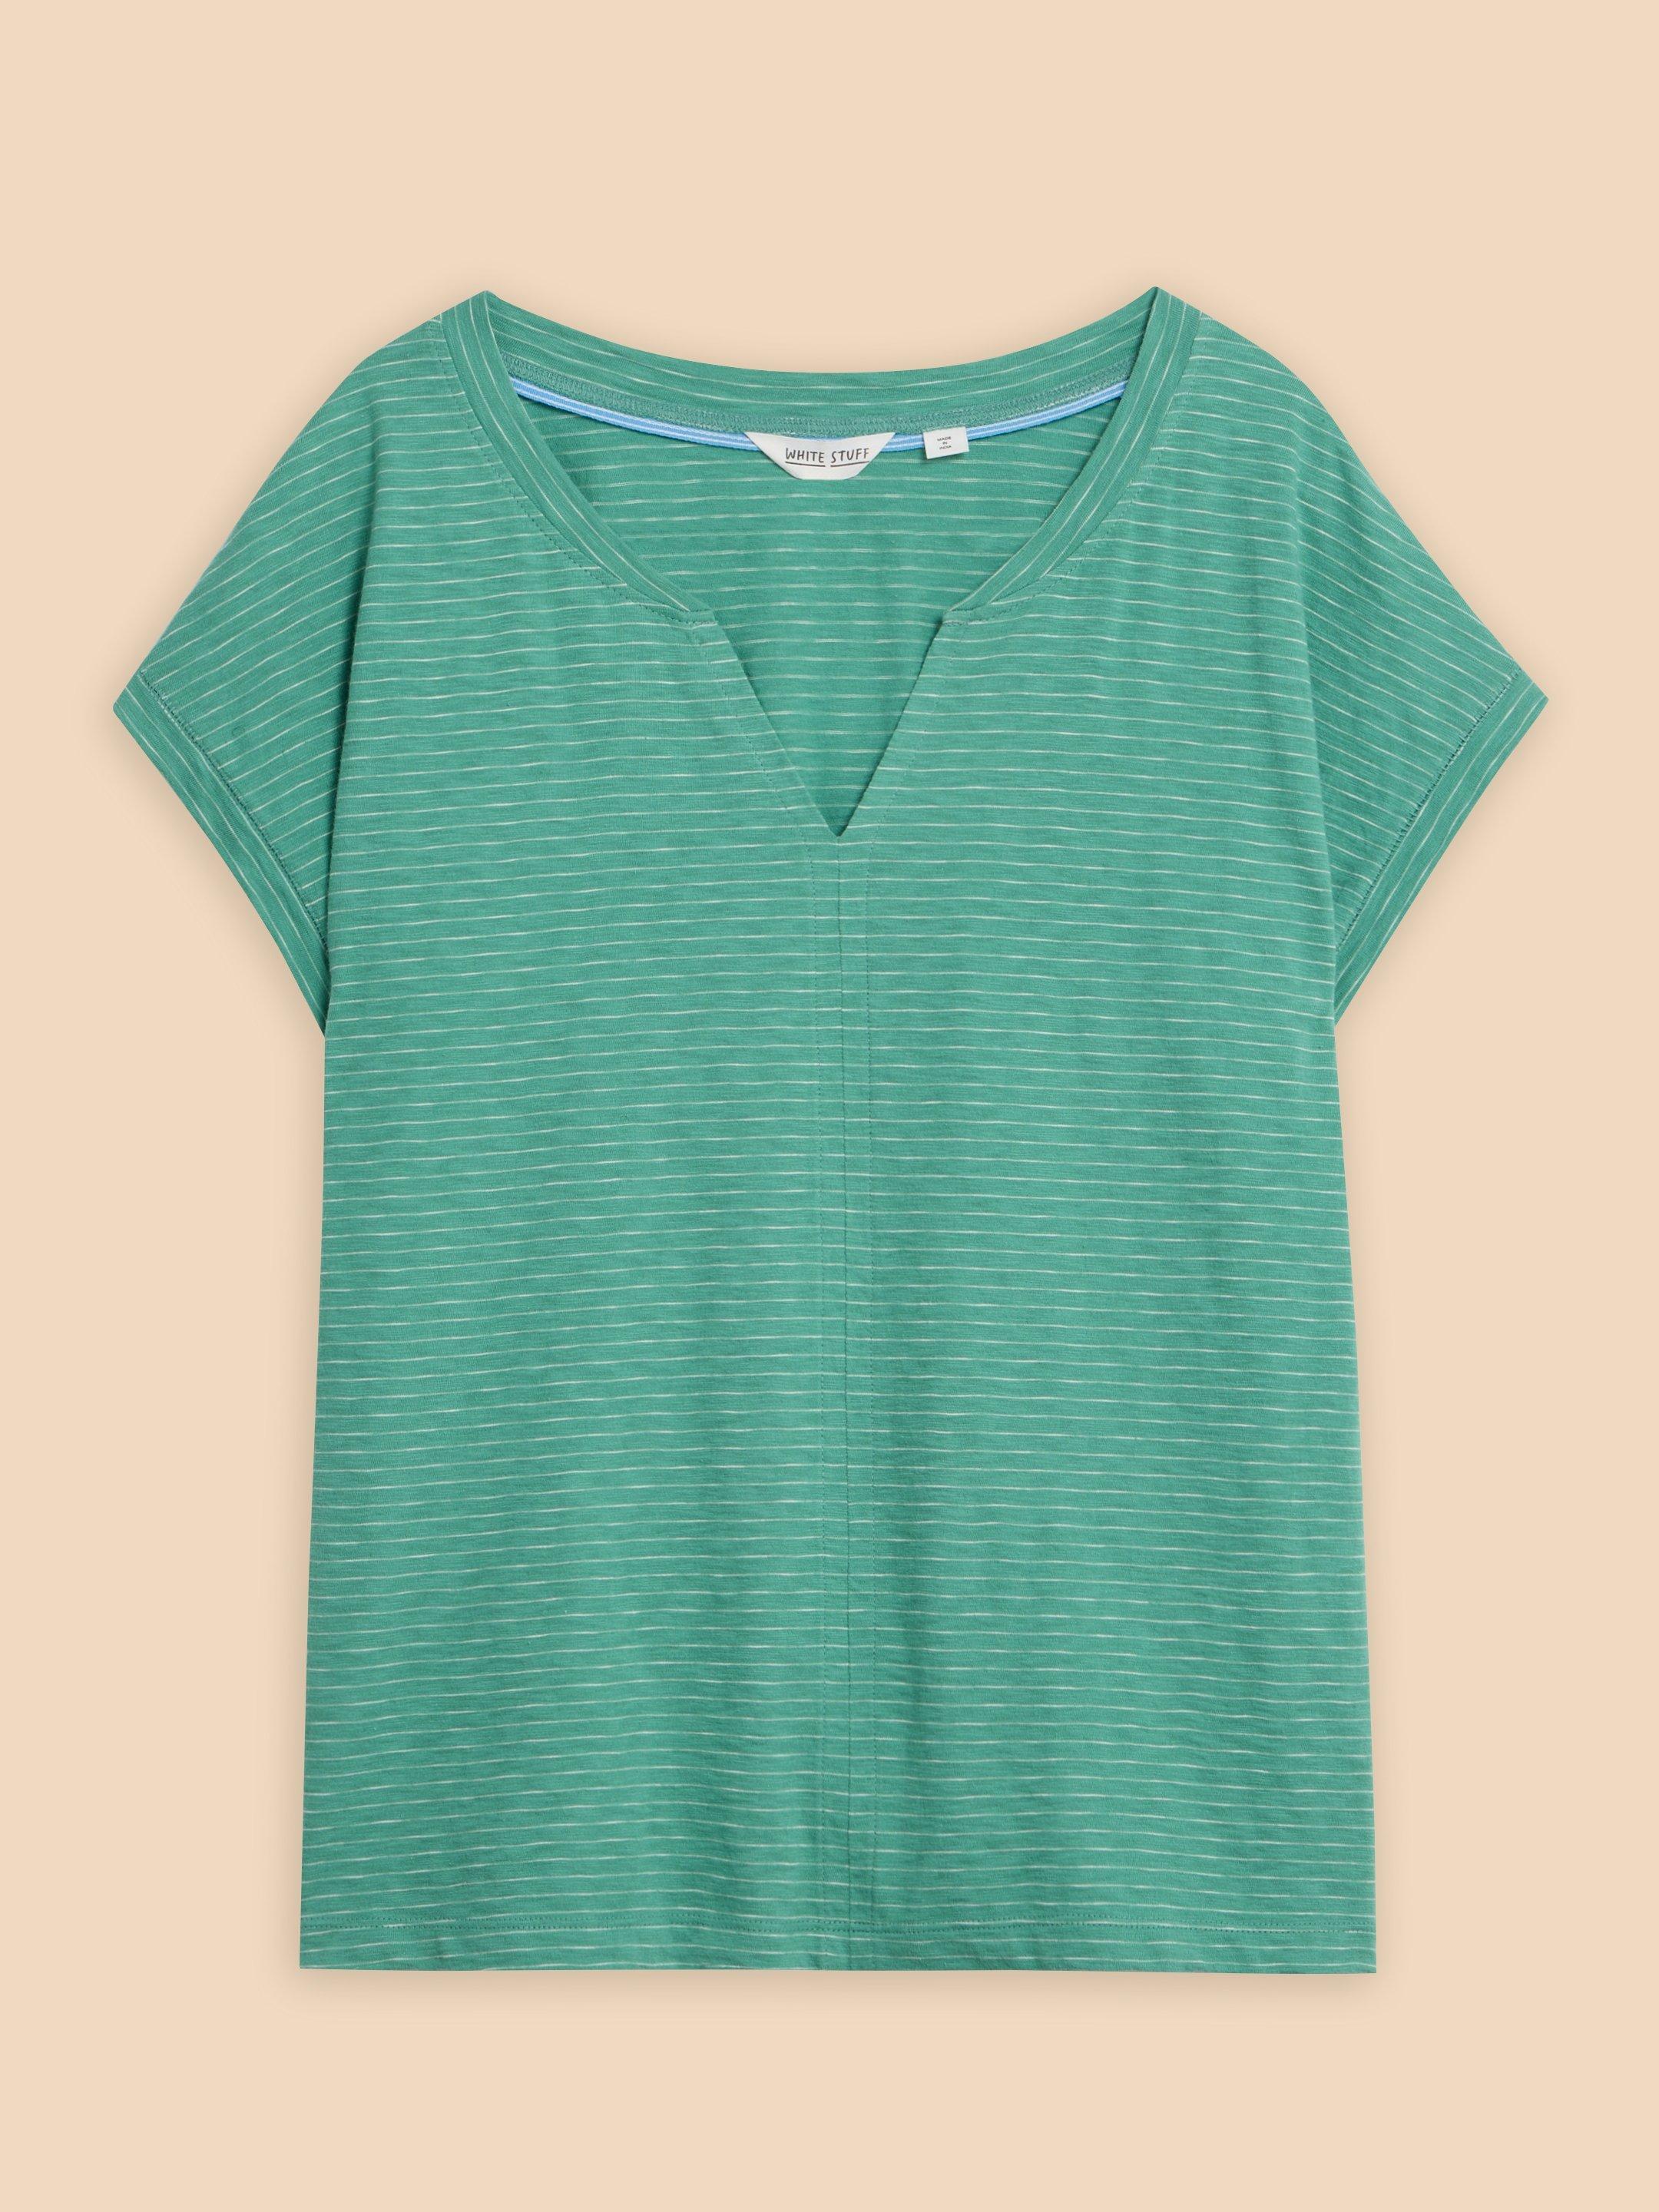 NELLY STRIPE NOTCH NECK TEE in TEAL MLT - FLAT FRONT